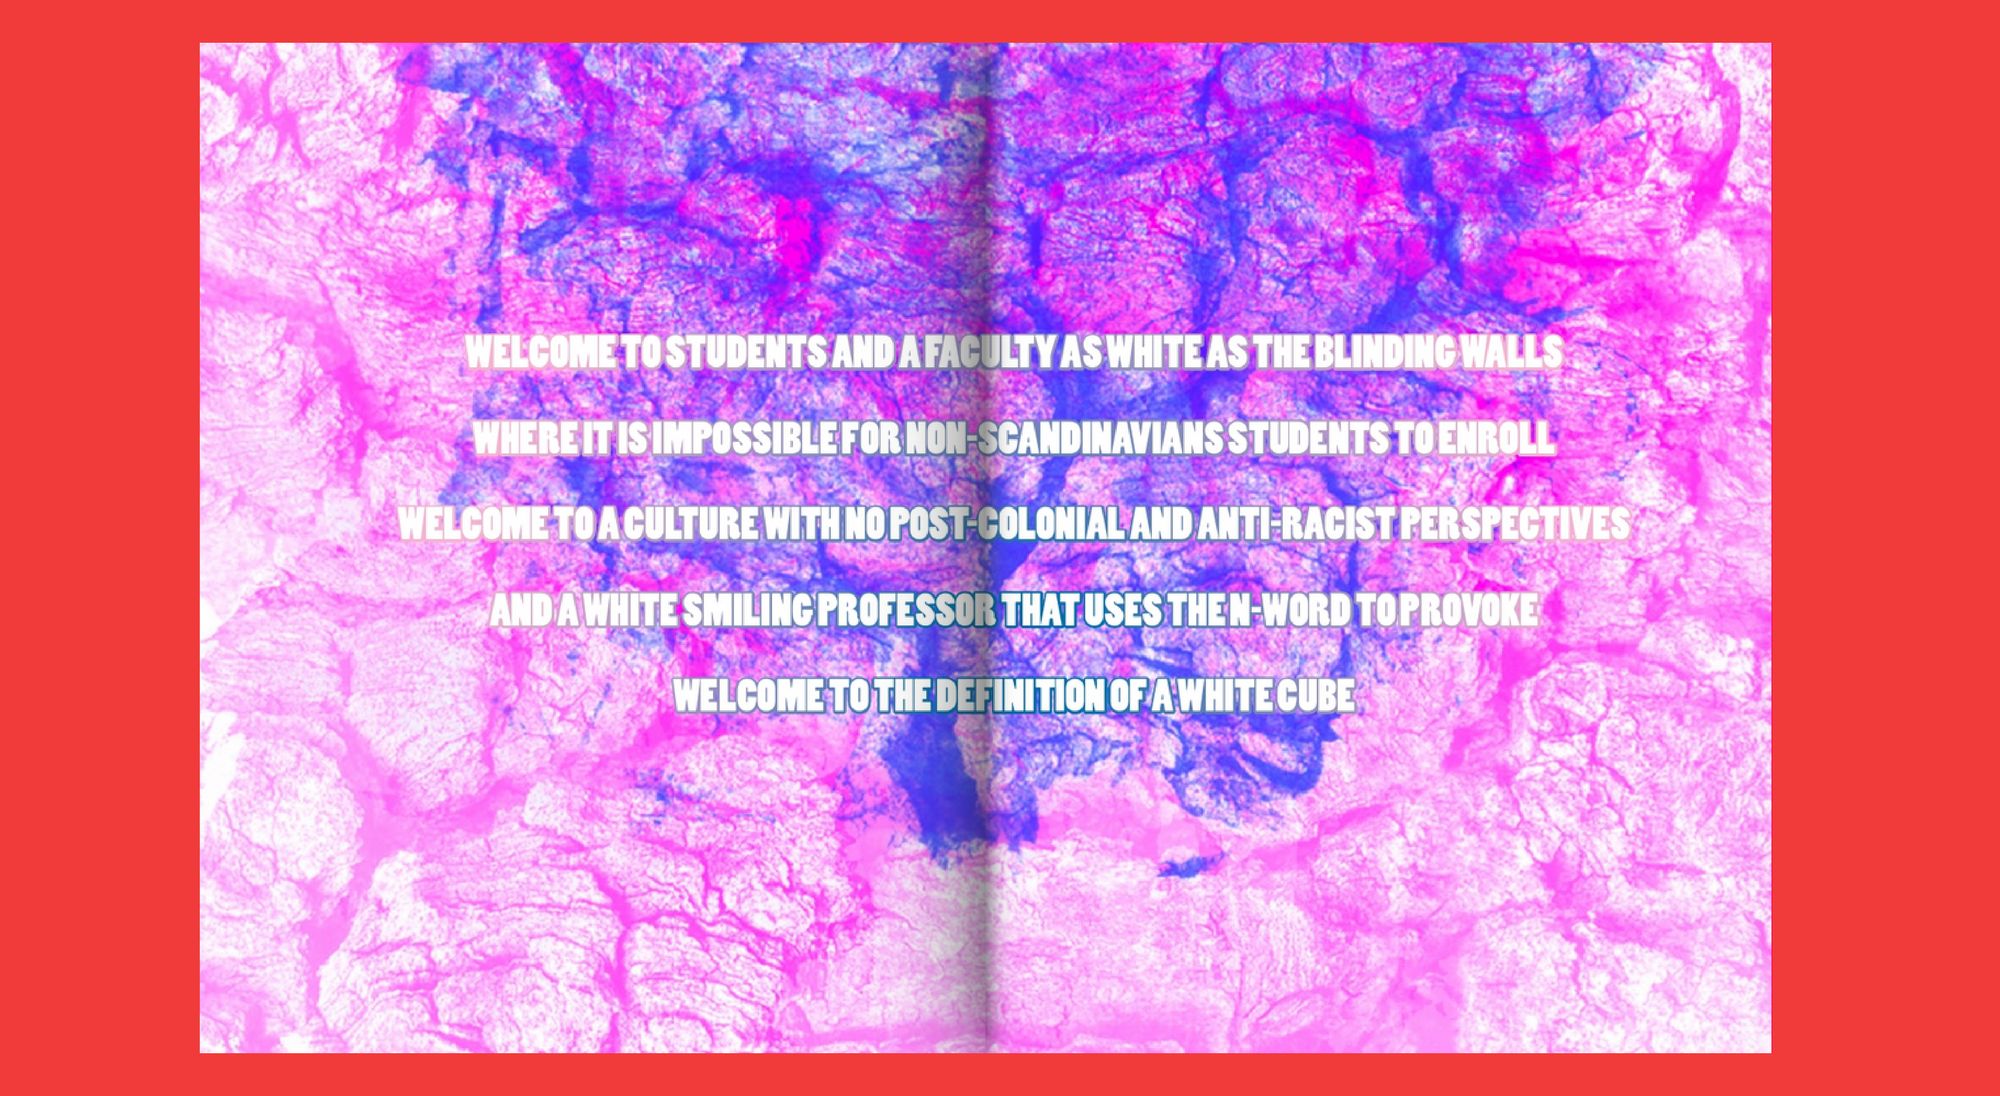 White bold type on a colorful abstract background. The text reads "Welcome to students and faculty as white as the blinding walls, where it is impossible for Non-Scandinavian students to enroll. Welcome to a culture with no post-colonial and anti-racist perspectives and a white smiling professor that uses the N-word to provoke. Welcome to the definition of a white cube.”